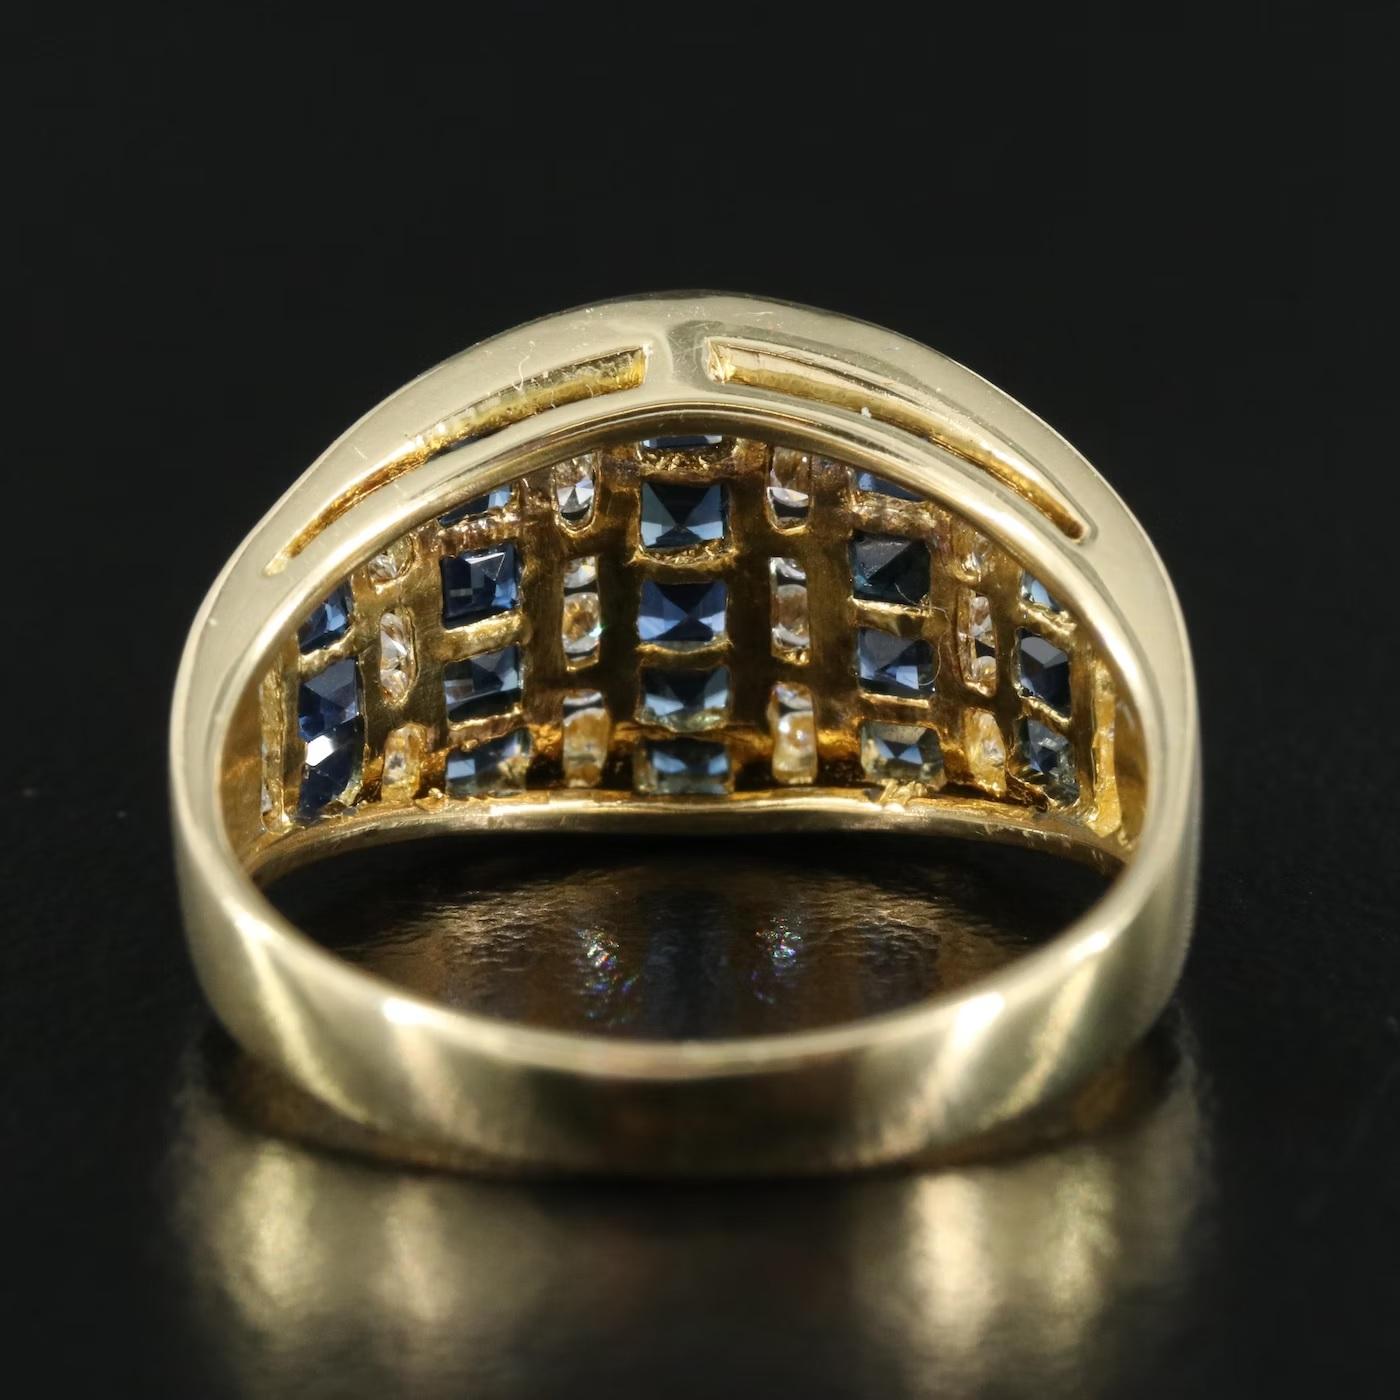 New / Italy Rimani Diamond and Blue Sapphire Ring / 18k Yellow Gold 1